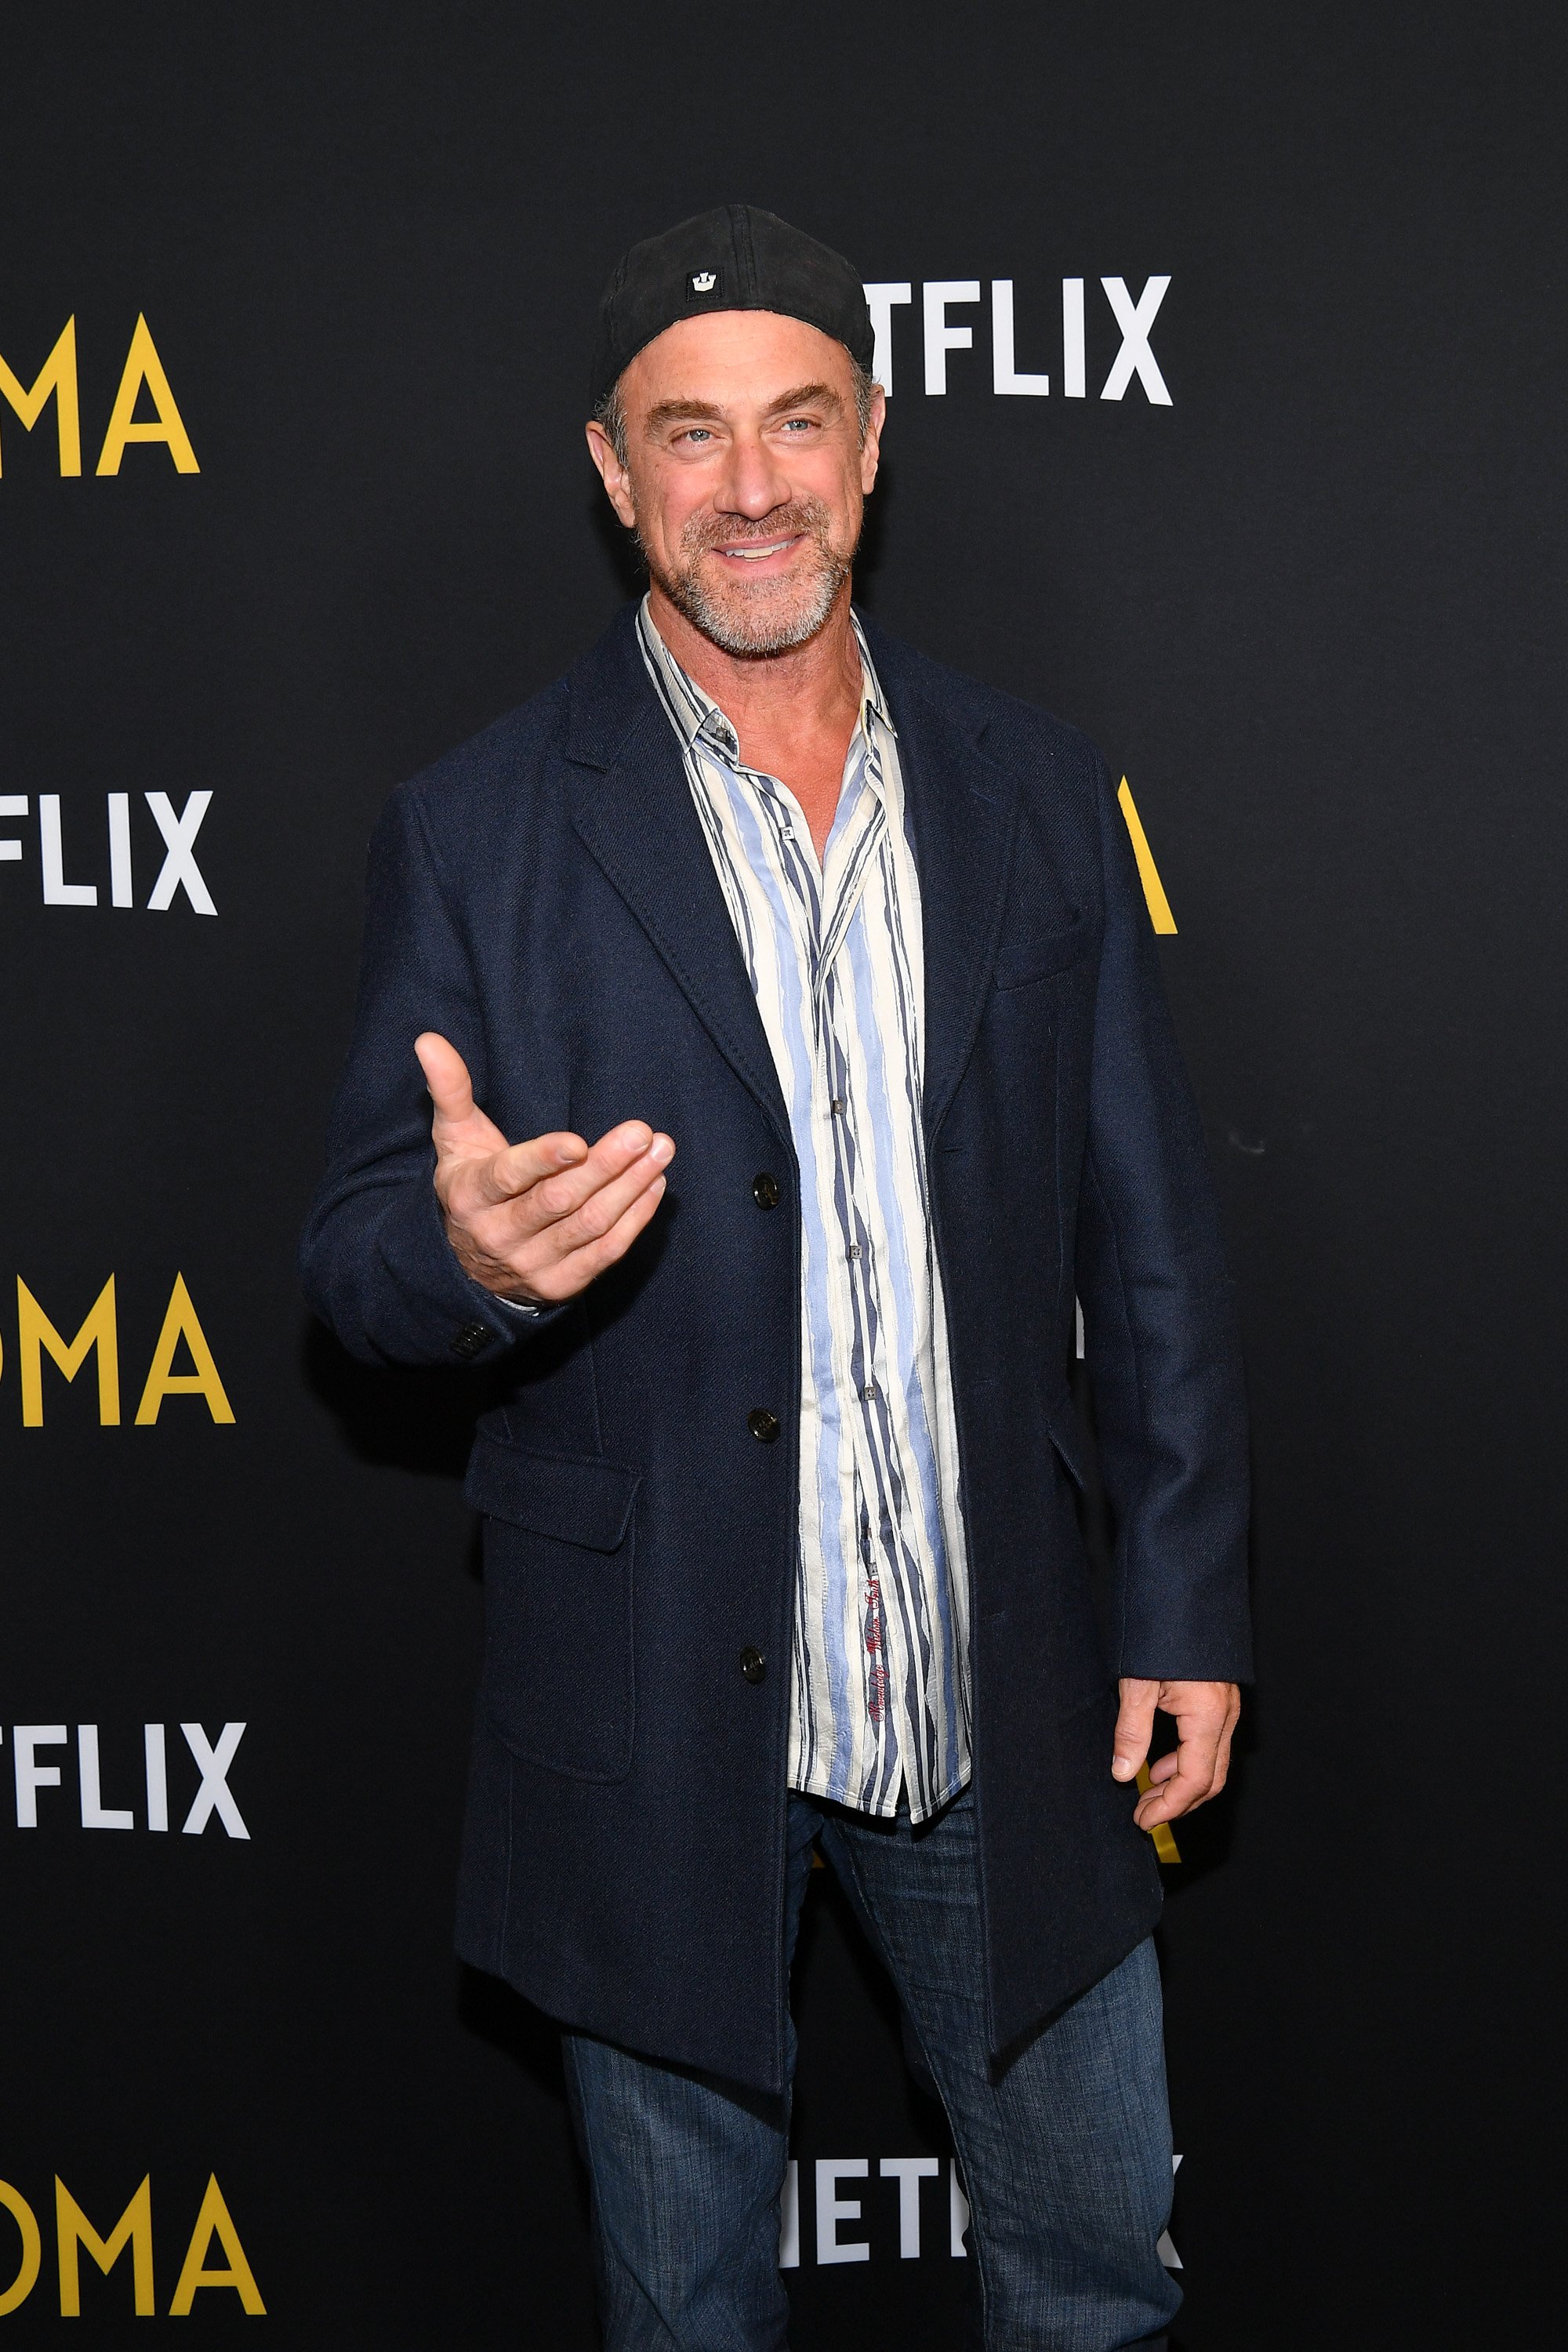 Christopher Meloni attends the "Roma" New York screening at DGA Theater on November 27, 2018 in New York City. | Photo: GettyImages